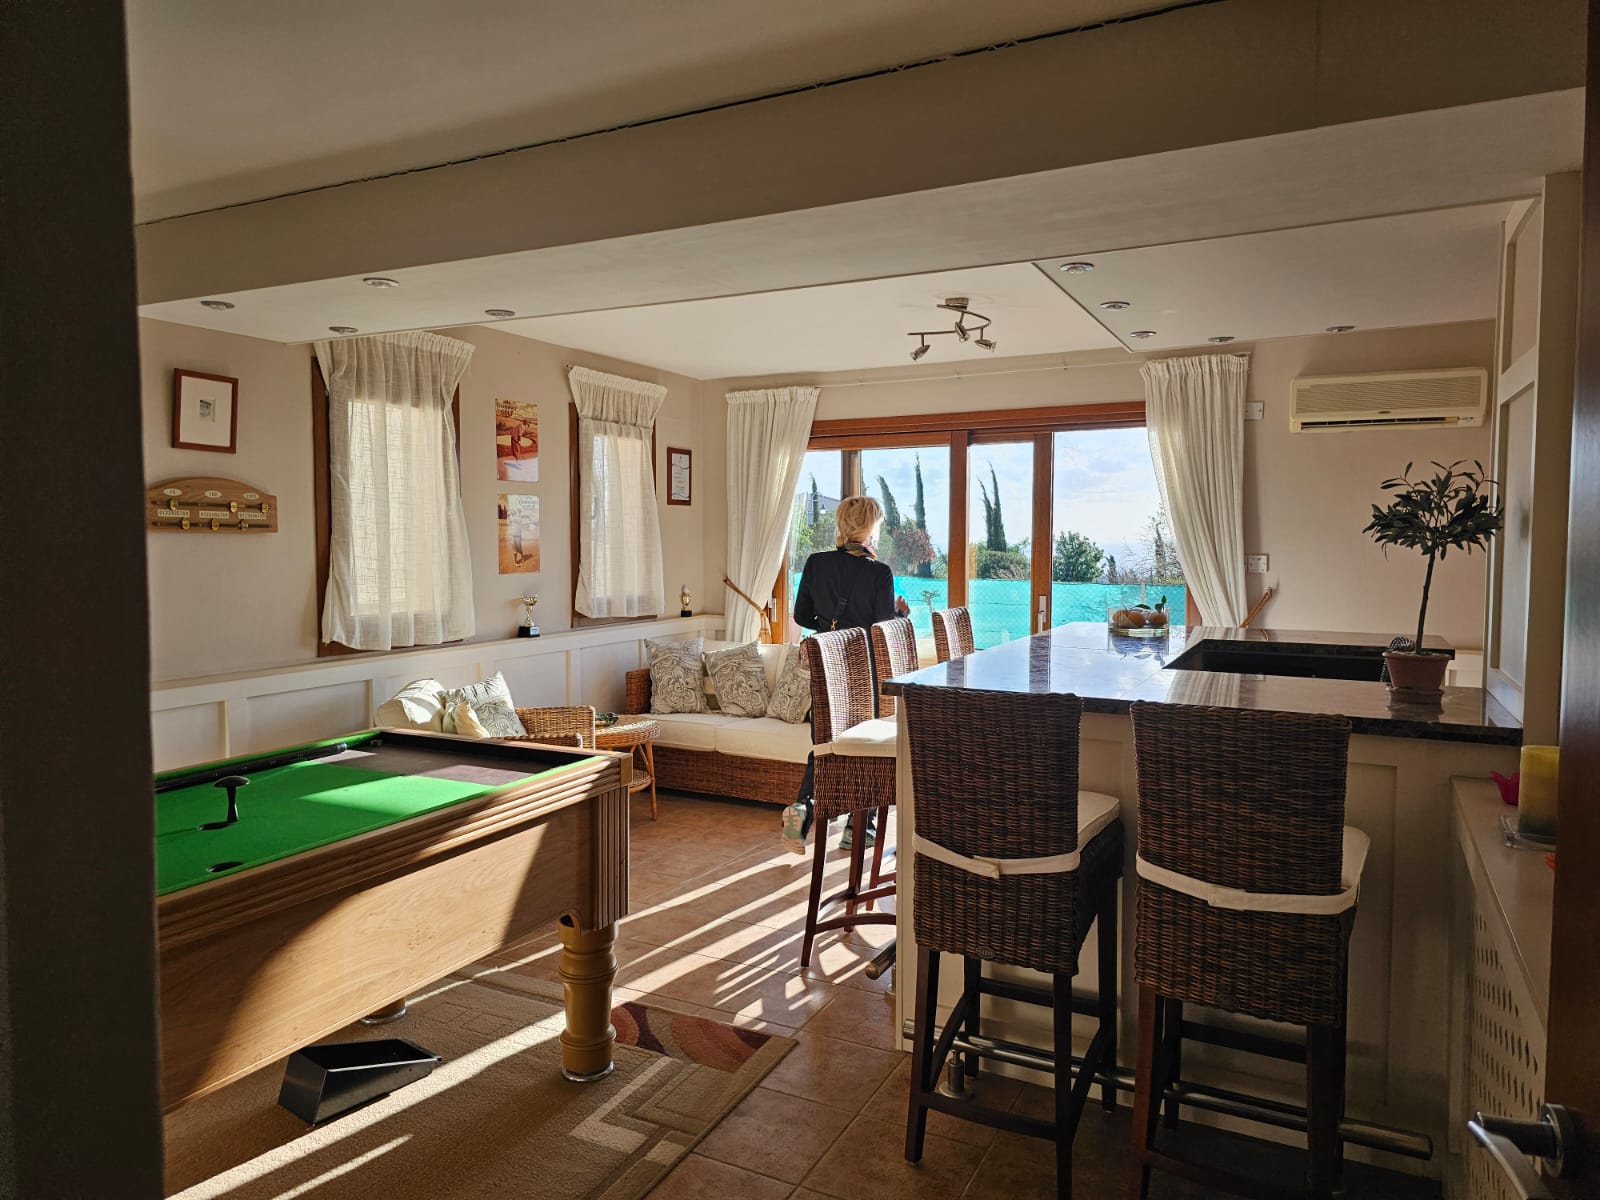 Hauson Realty - Cyprus Real Estate Agents A living room with a pool table and bar stools.